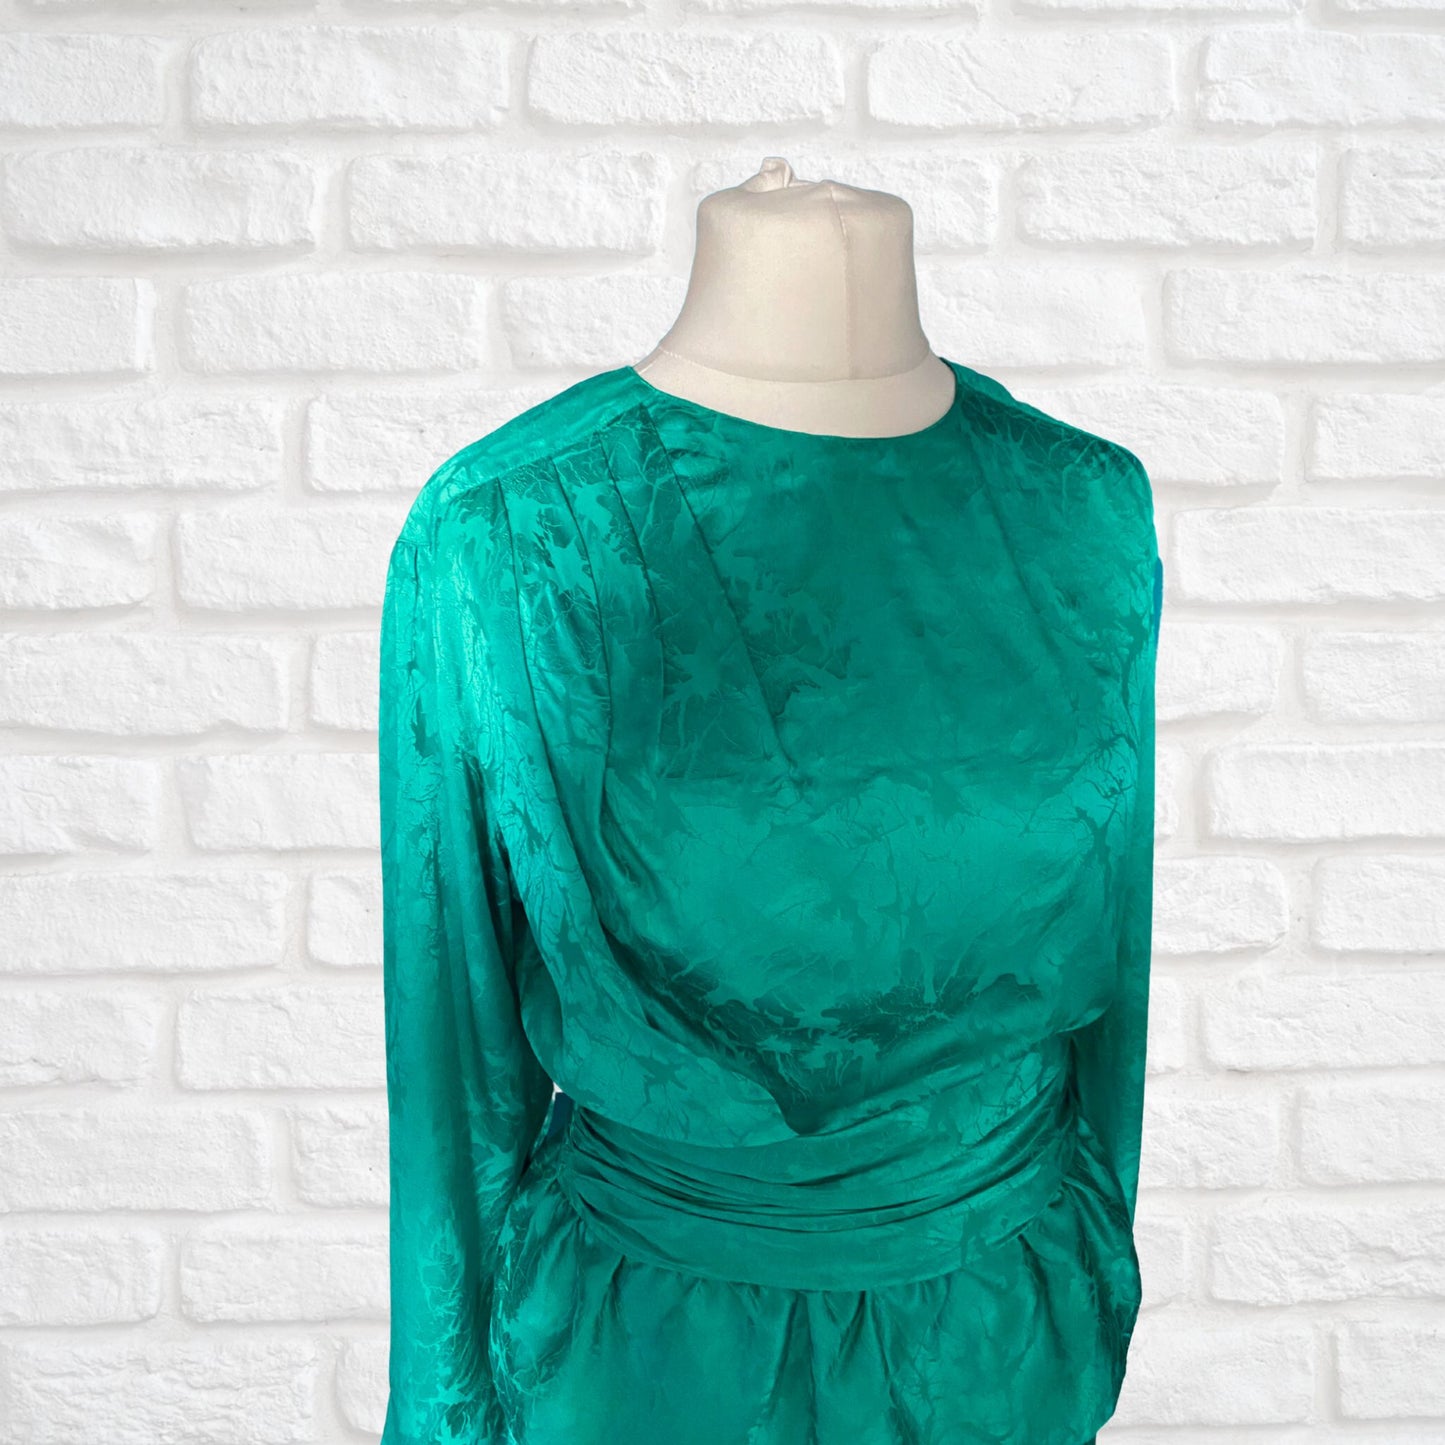 Vintage Green Silky 80s Dress with Peplum Skirt. Approx UK size 10-12